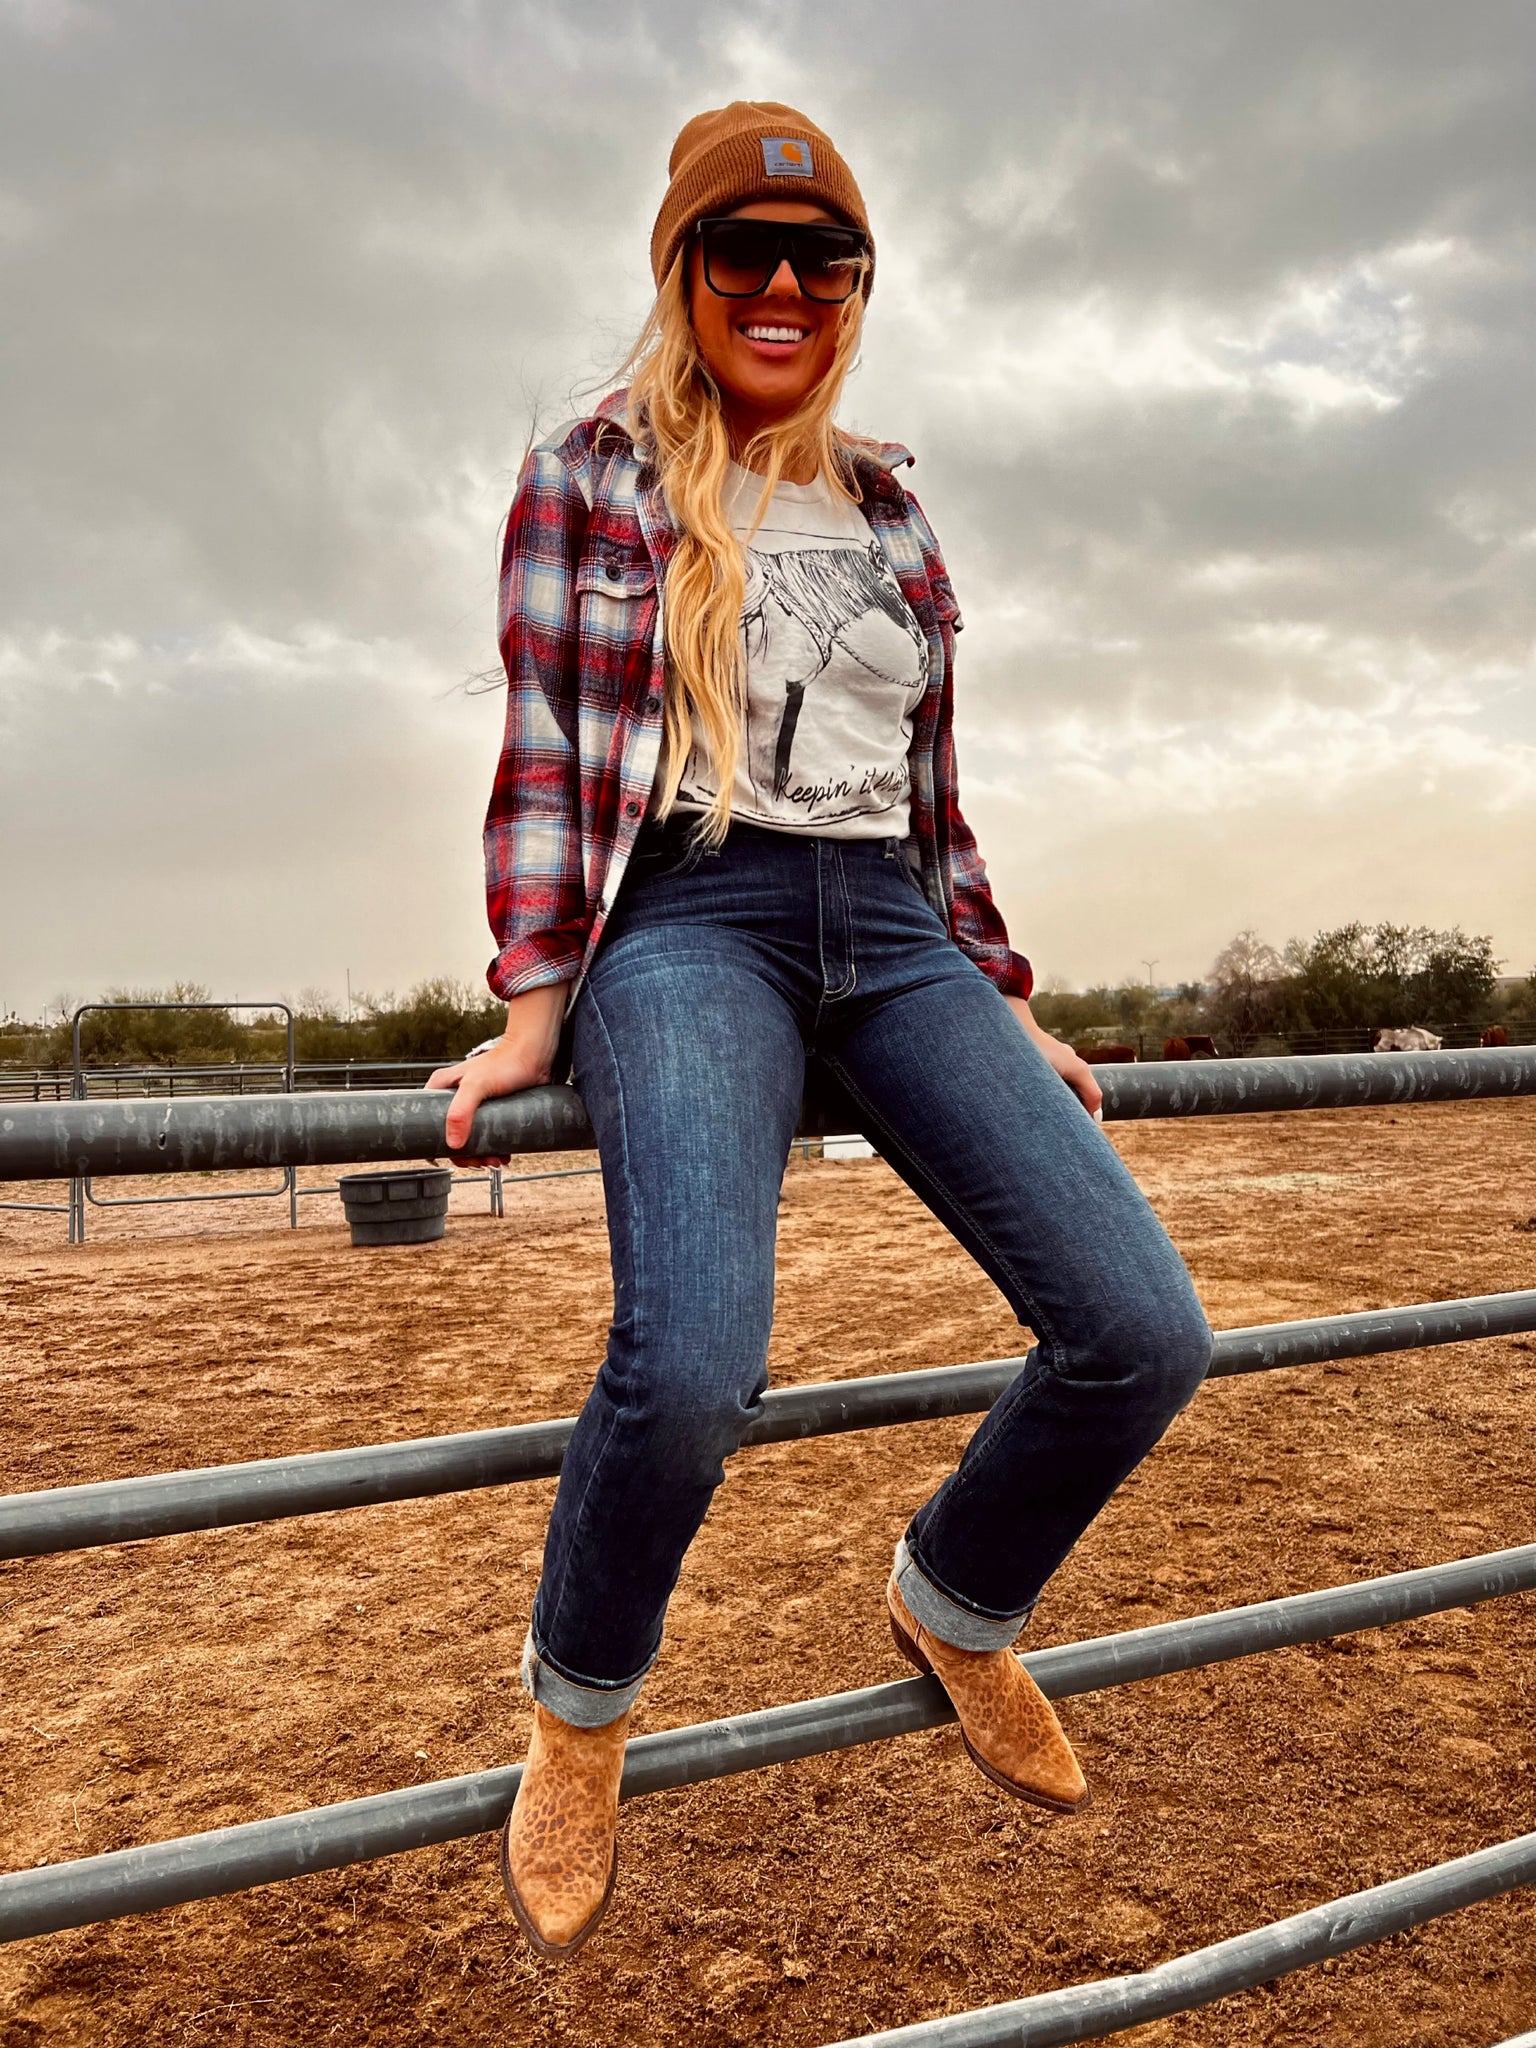 Keepin’ It Western Horse Graphic Tee